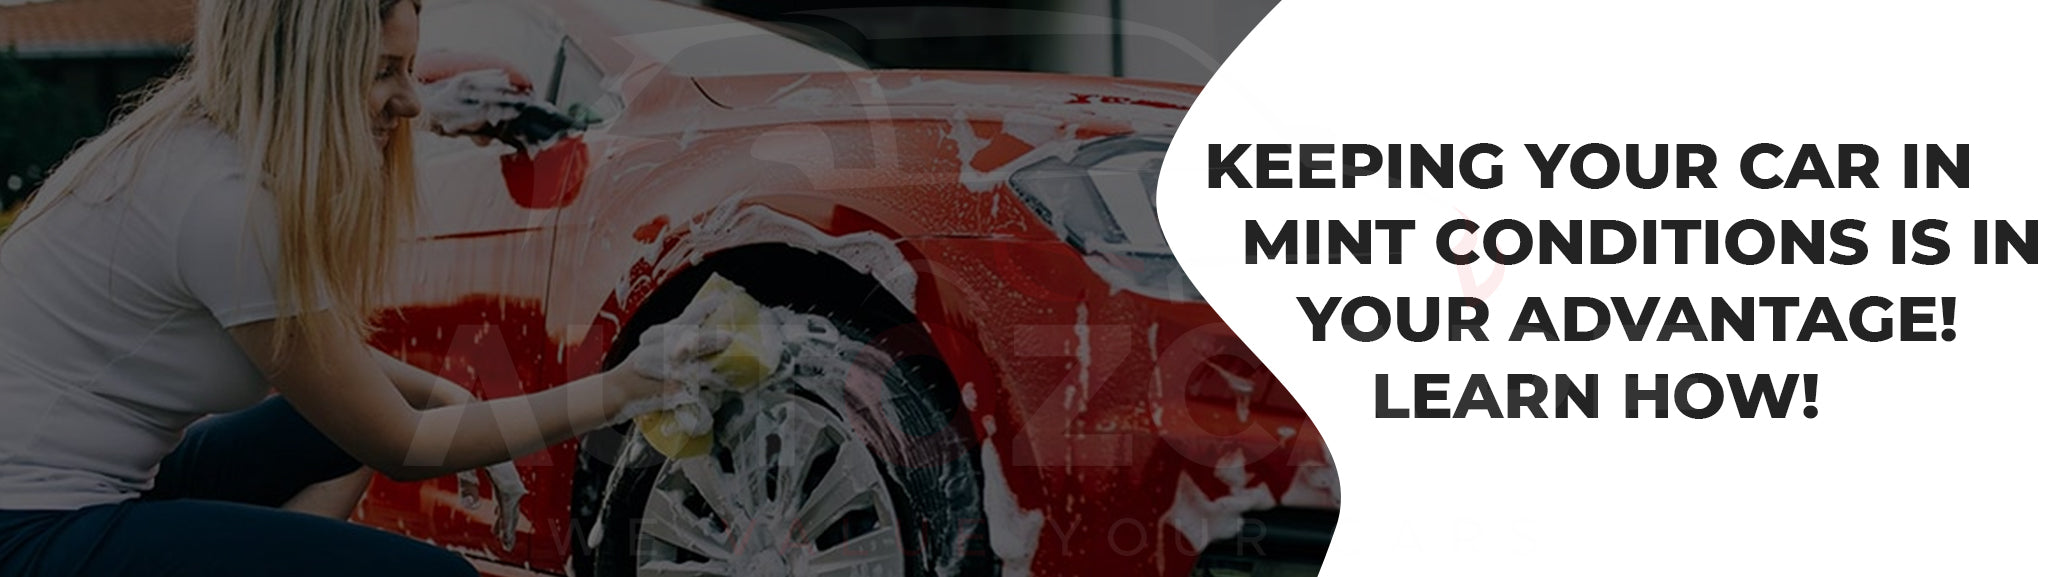 Keeping your car in mint conditions is in your advantage! Learn how!